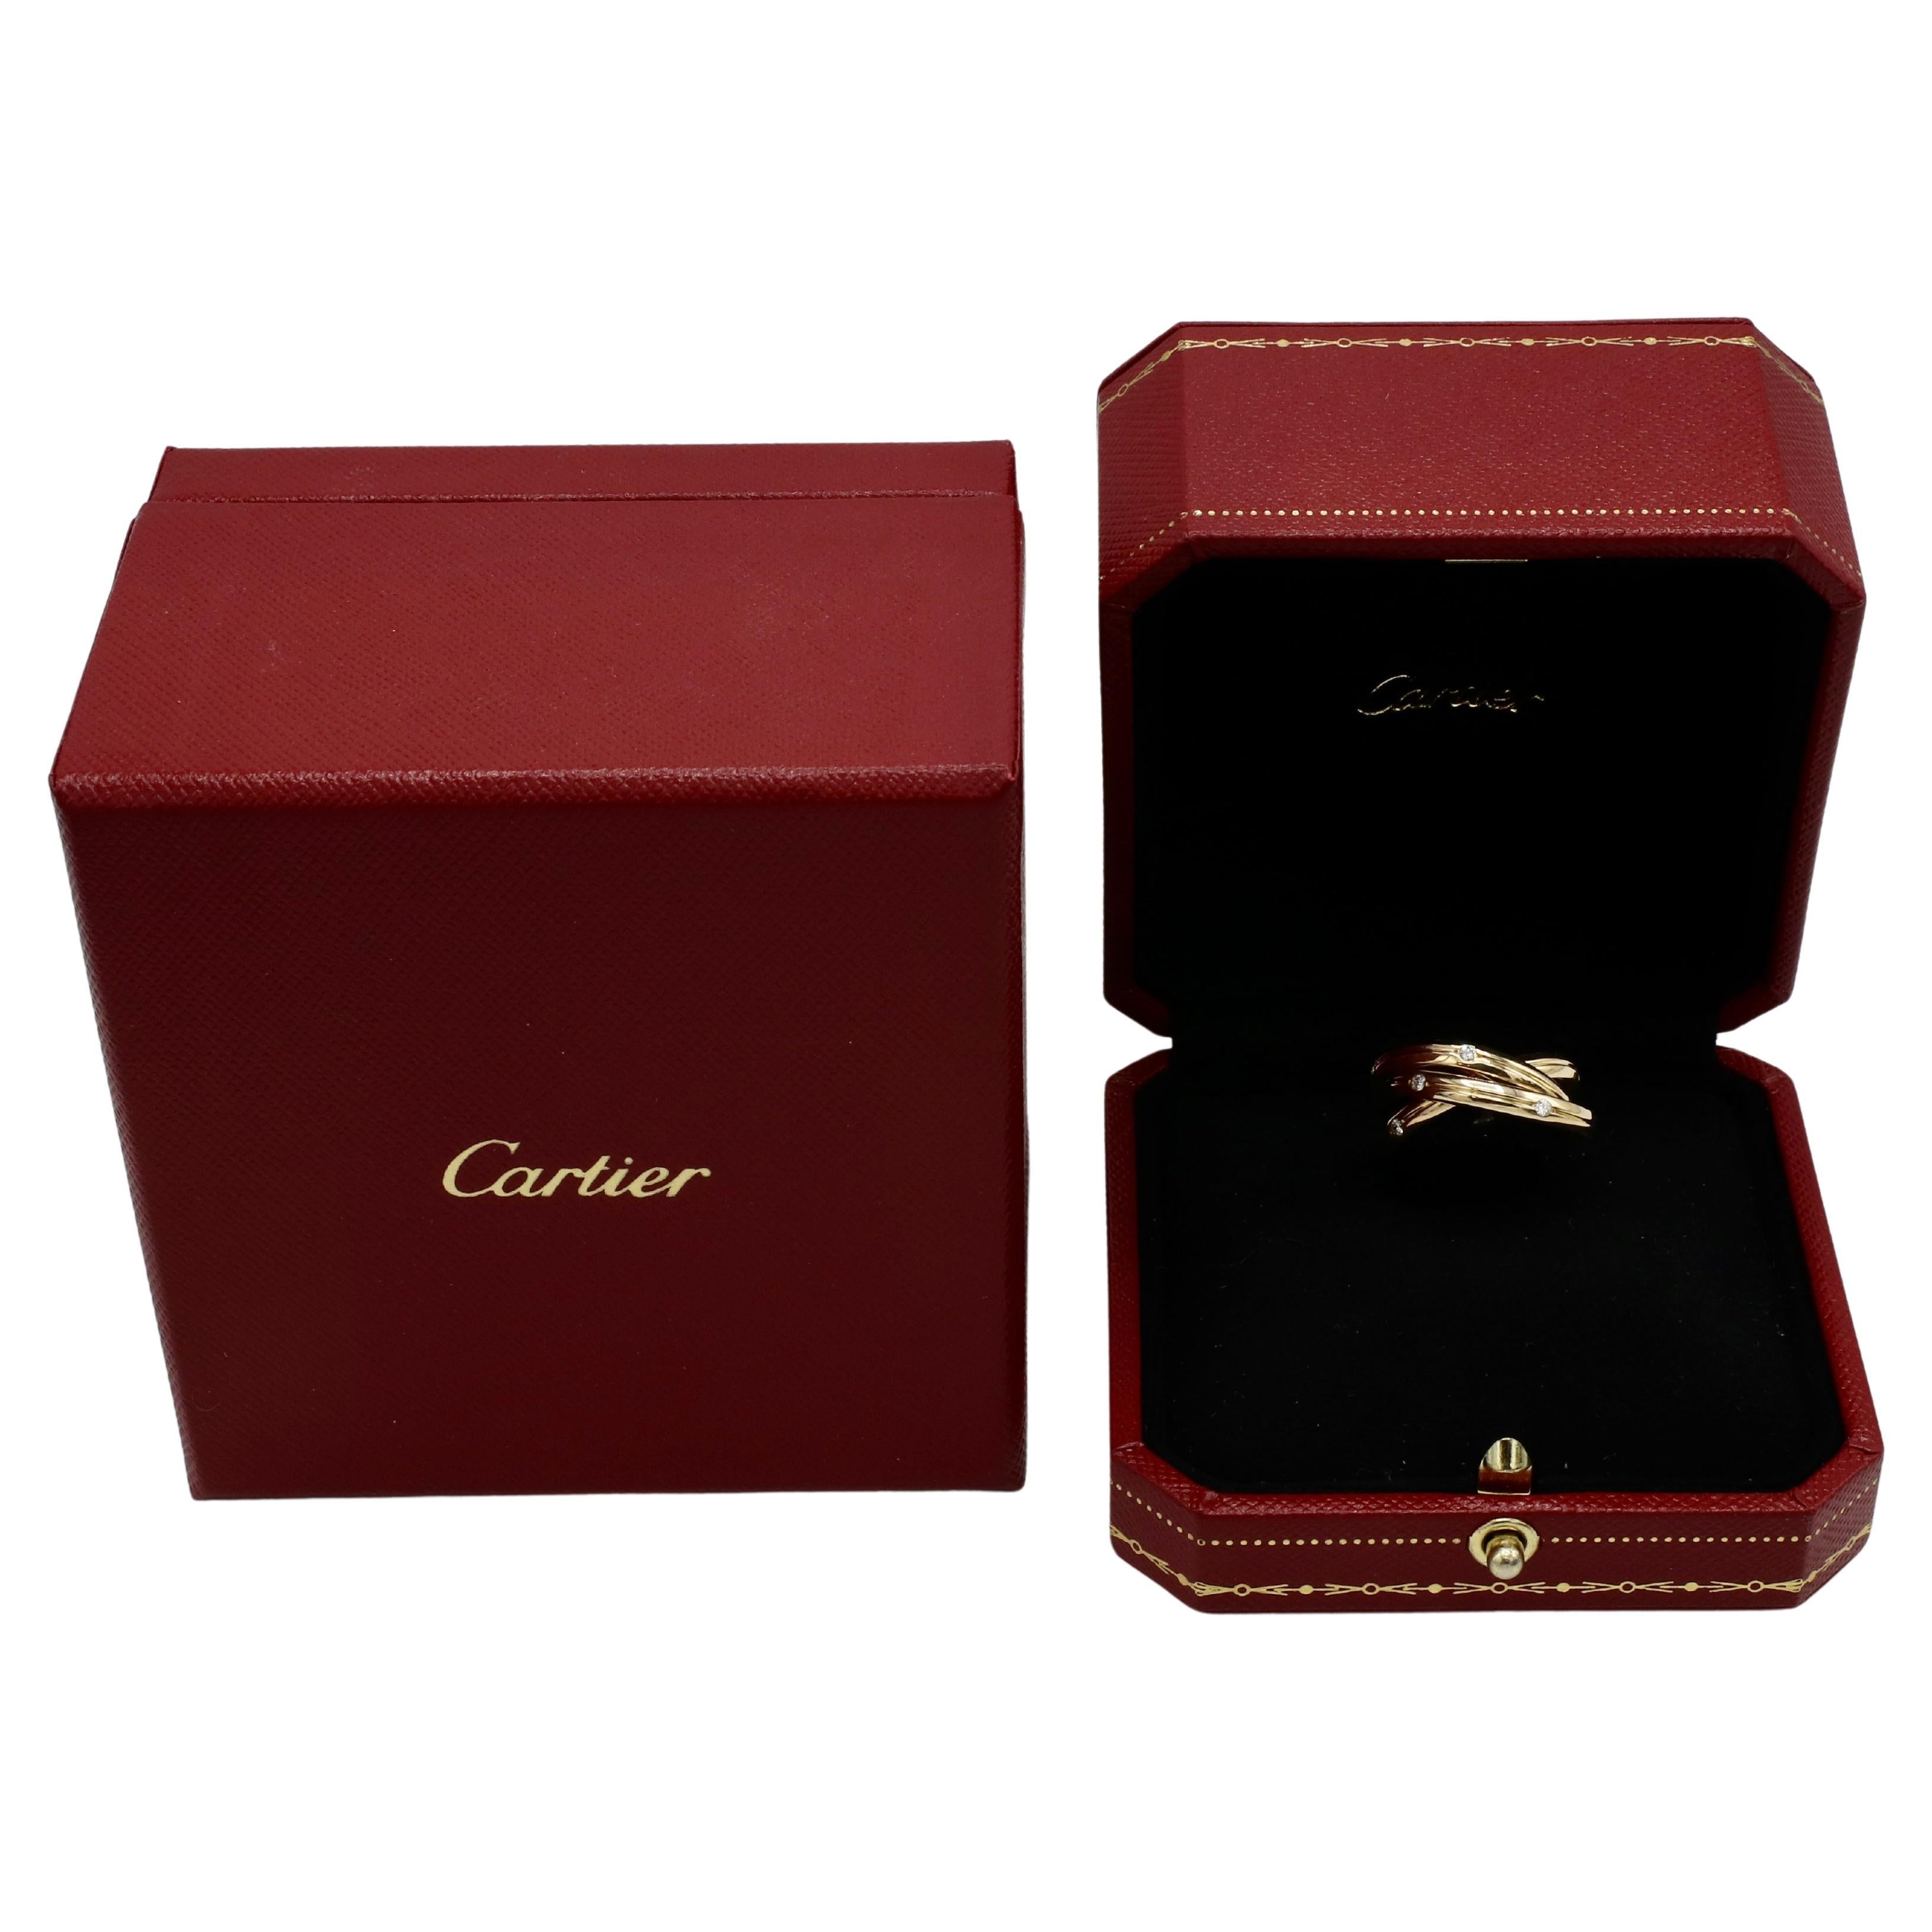 Cartier Constellation Vintage Natural Diamond & Yellow Gold Trinity Rolling Band Ring 
Metal: 18k yellow gold
Weight: 8.91 grams
Diamonds: Approx. 0.45 CTW E-F VS round natural diamonds
Size: 51 (5.75 US)
Bands: 3mm each
Signed: Cartier 750 849 380